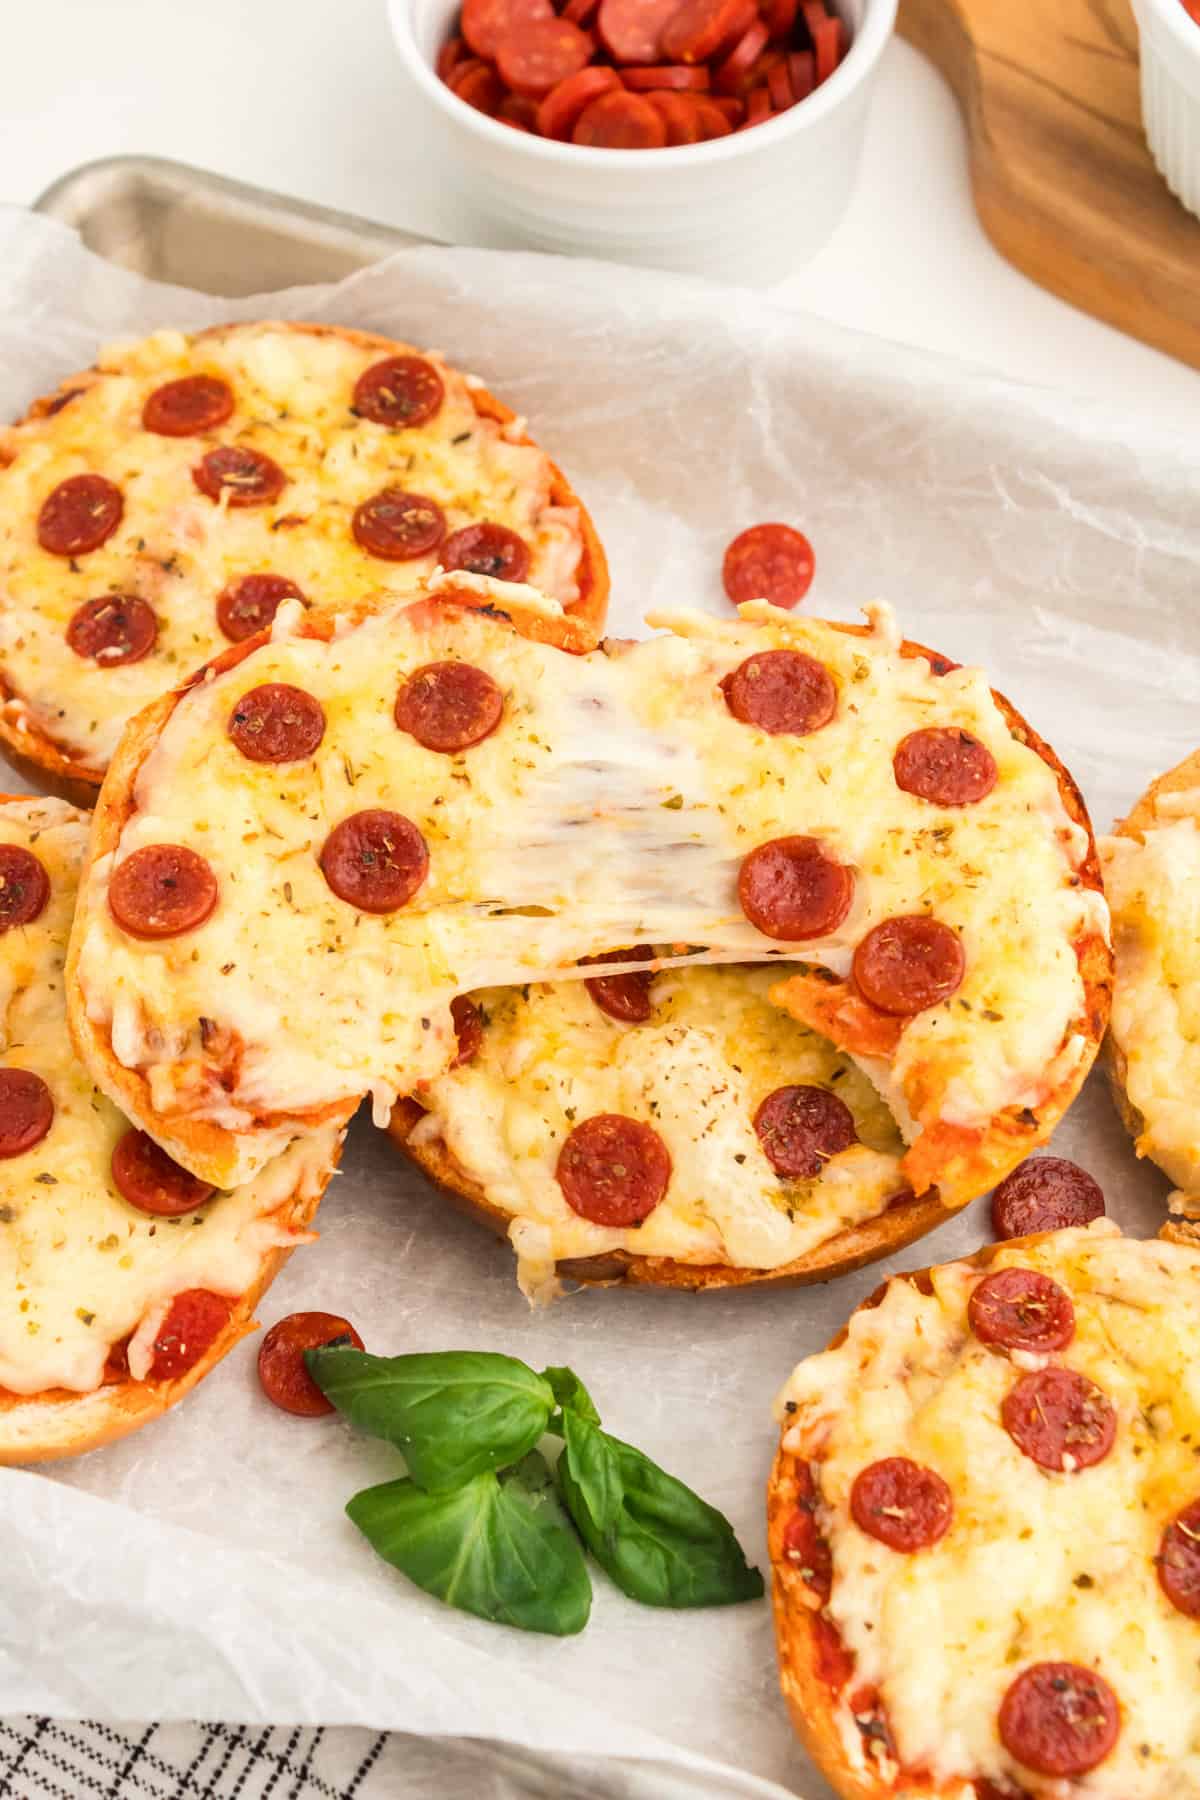 Pizza bagel torn in half to show melty cheese pull.